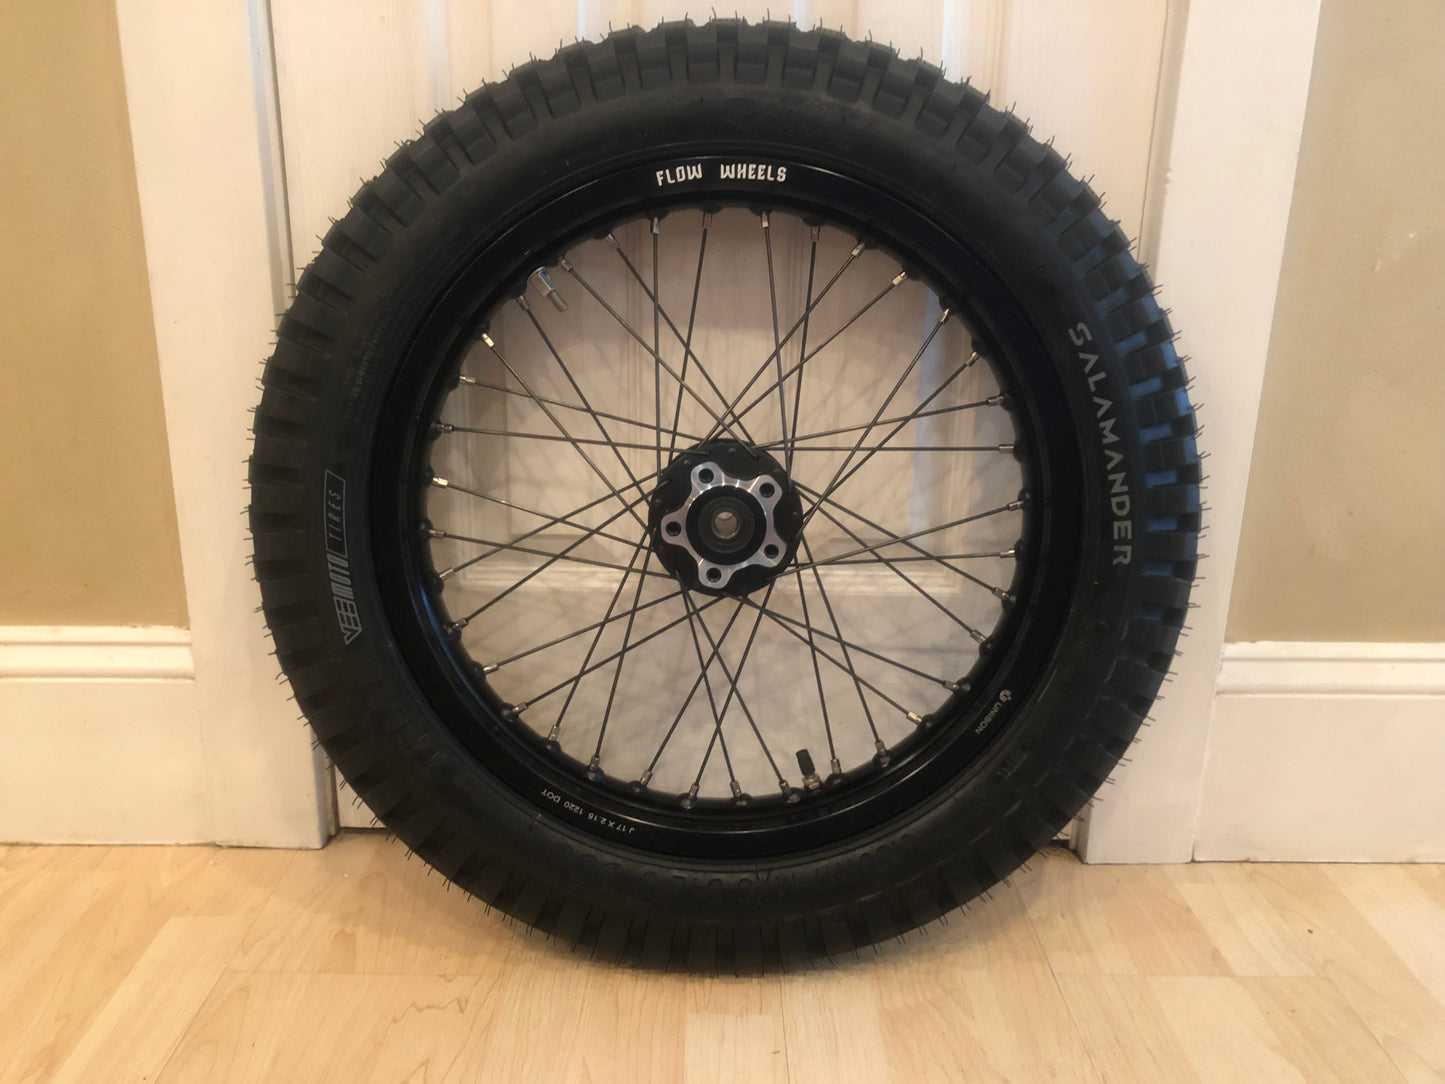 Surron or Talaria Sting 17" rear trials tire and wheel